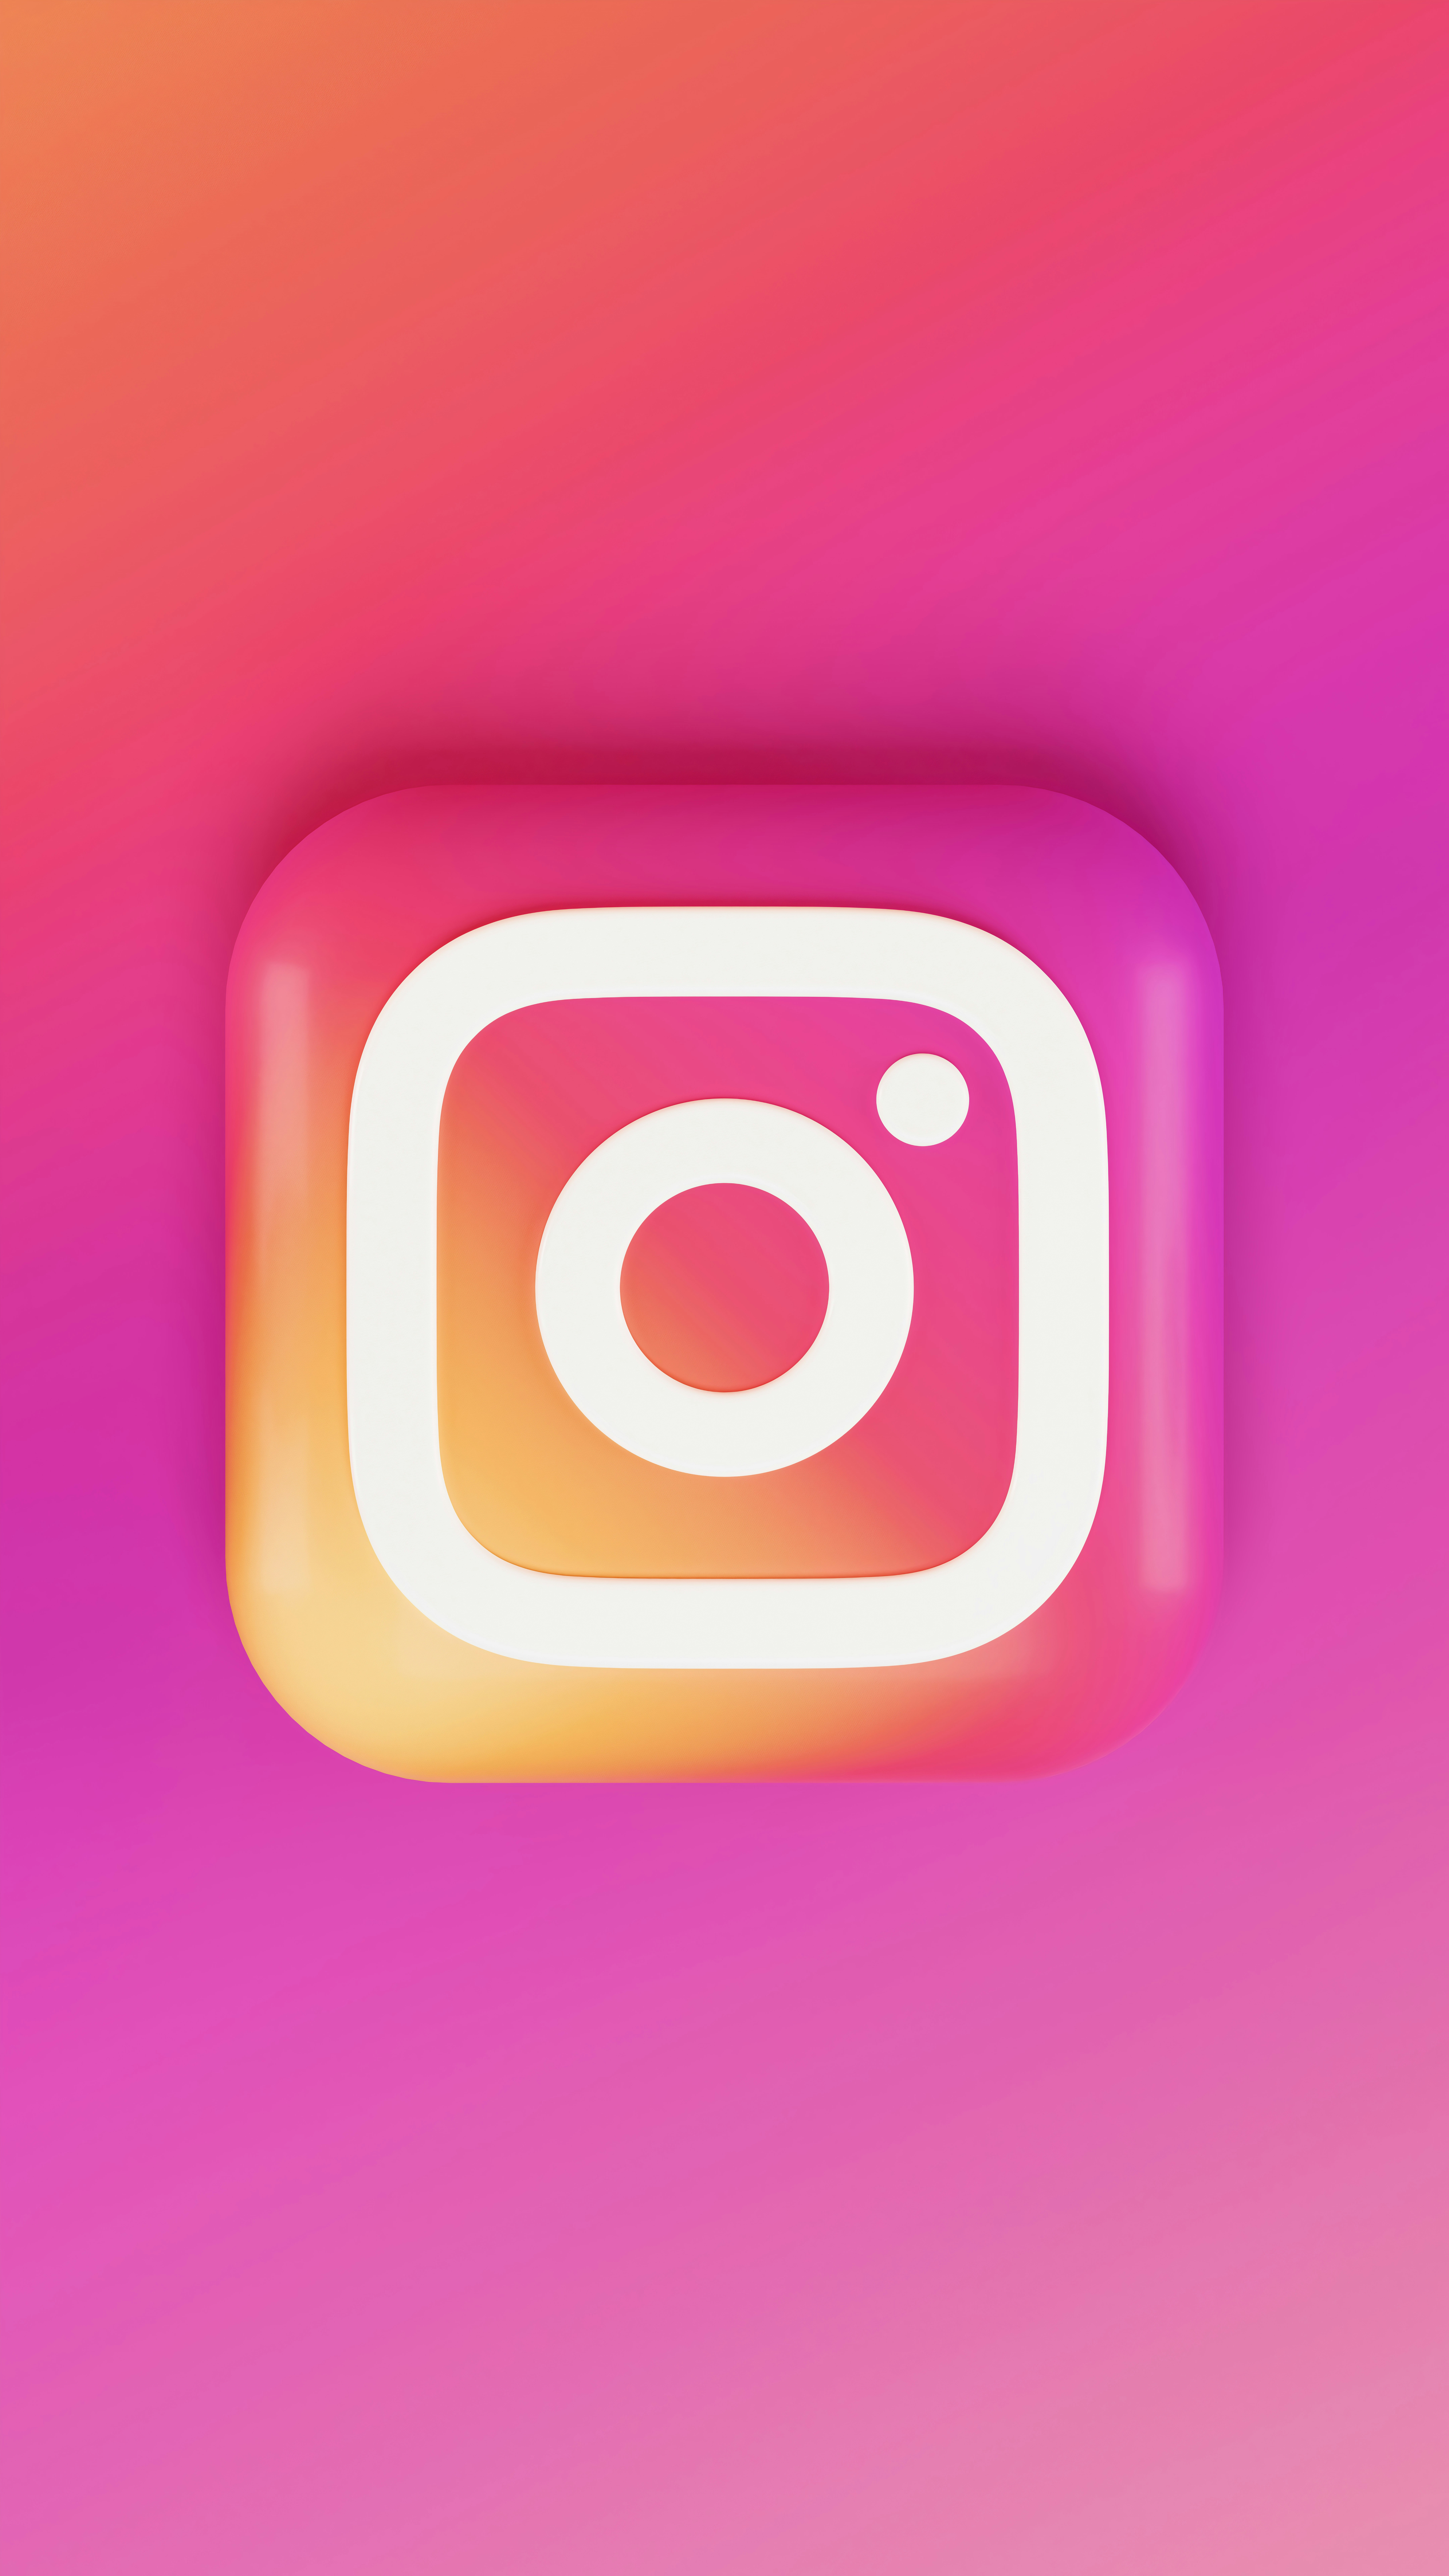 Wallpaper of my Instagram 3D icon concept. Write me: alexanderbemore@gmail.com, if you need 3D visuals for your products. Can be used for iPhone and Android devices.